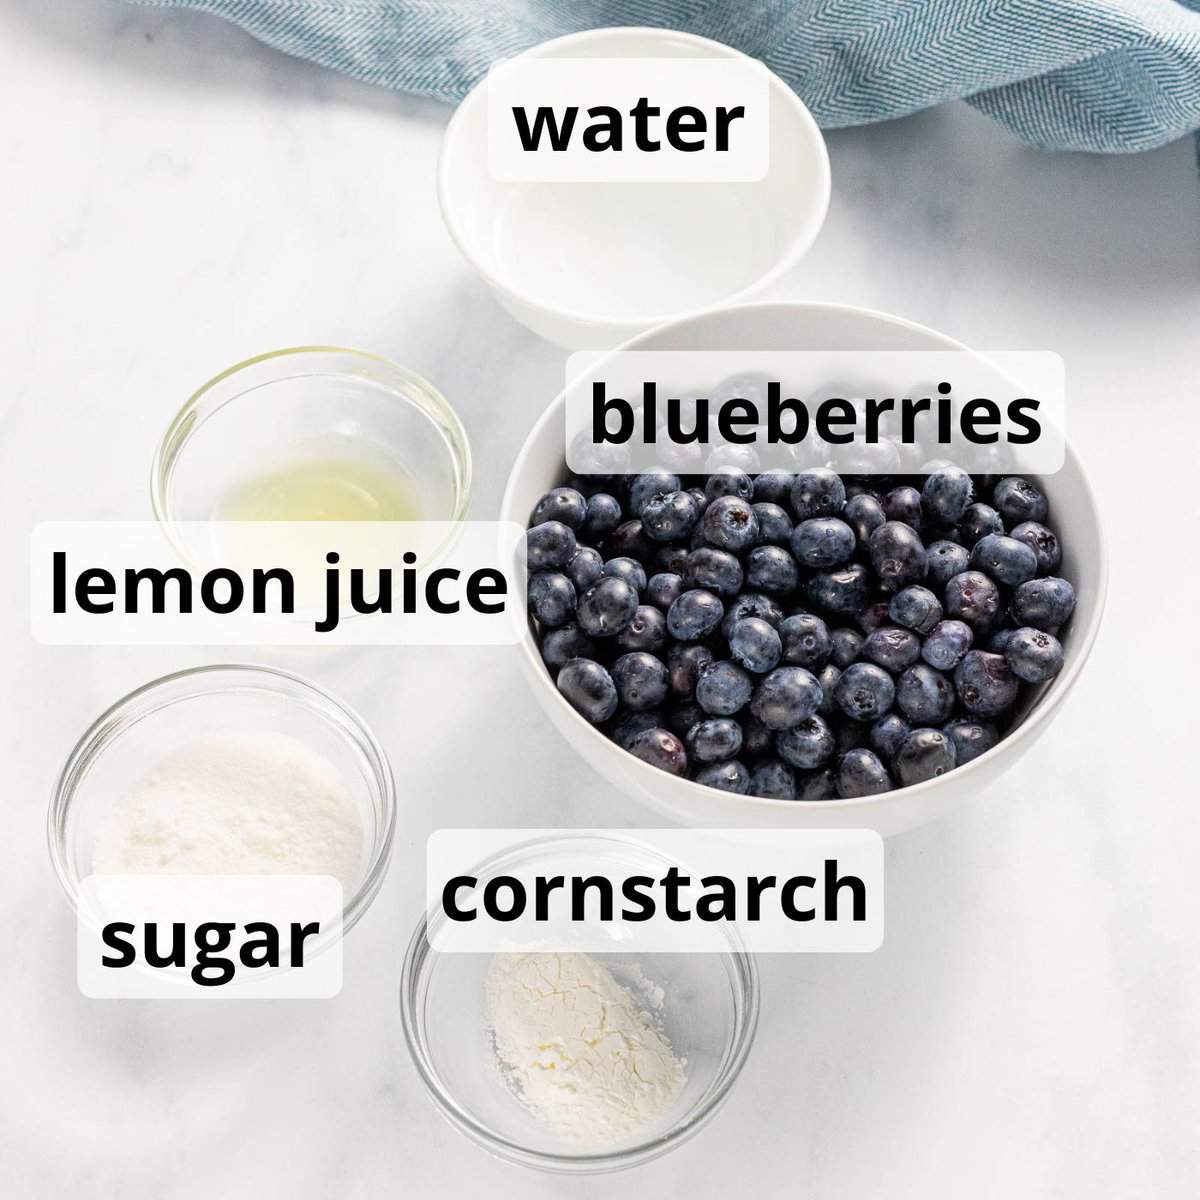 Ingredients for blueberry compote including fresh blueberries, sugar, and lemon juice.